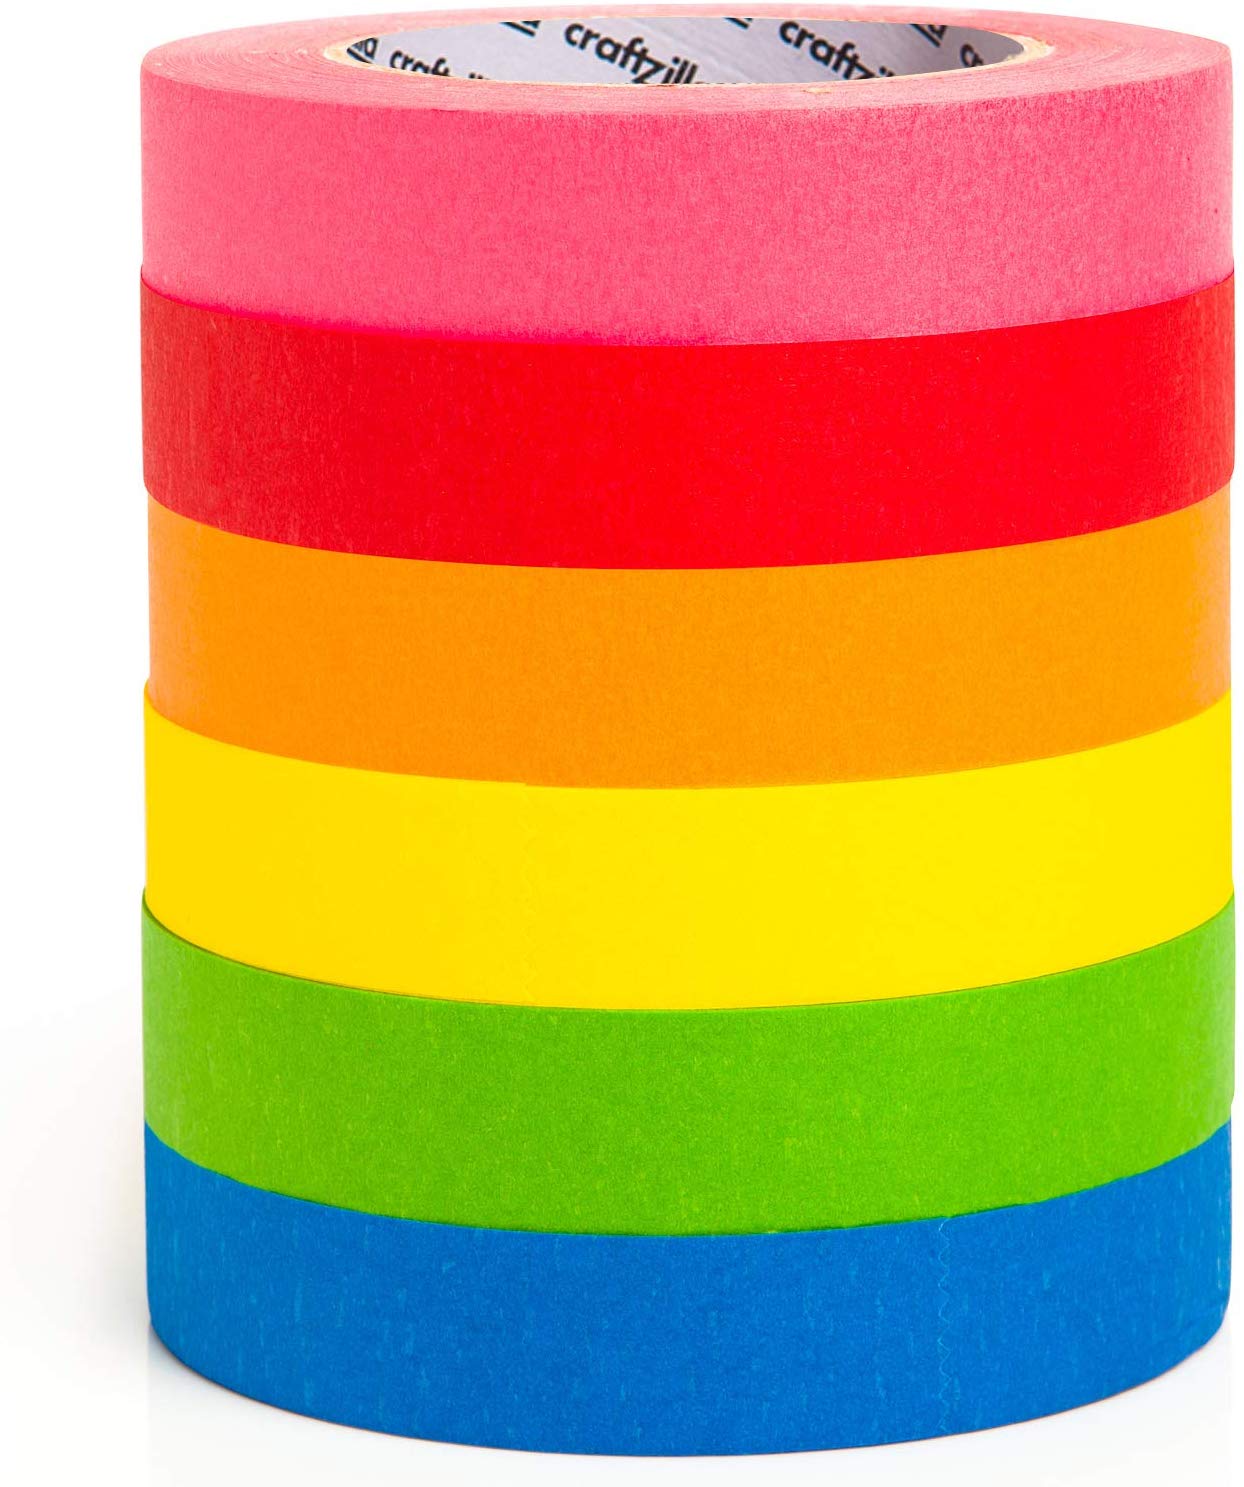 1/2 Inch Thick Masking Tape in 8 Colors! Colorful Tape for Kids